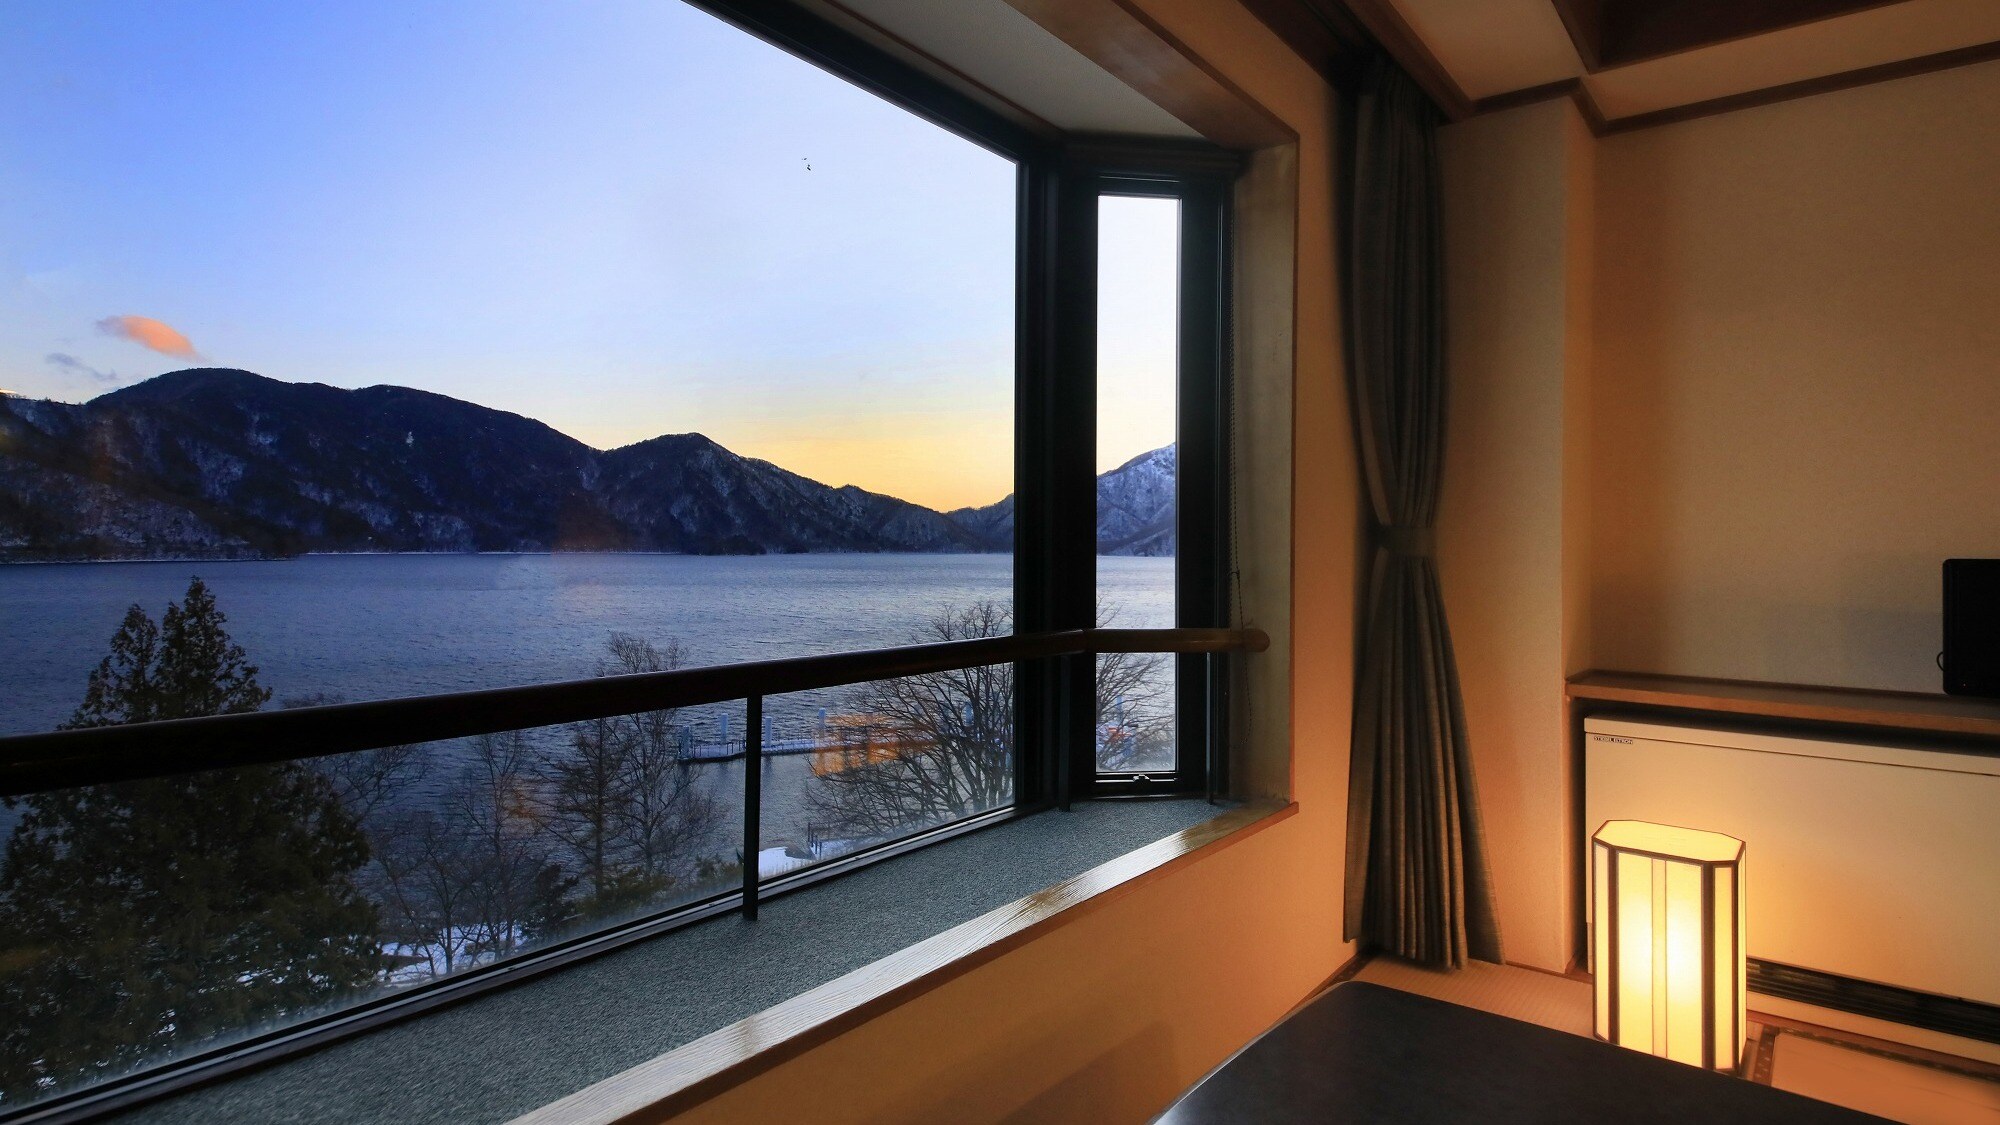 All guest rooms have a lake view